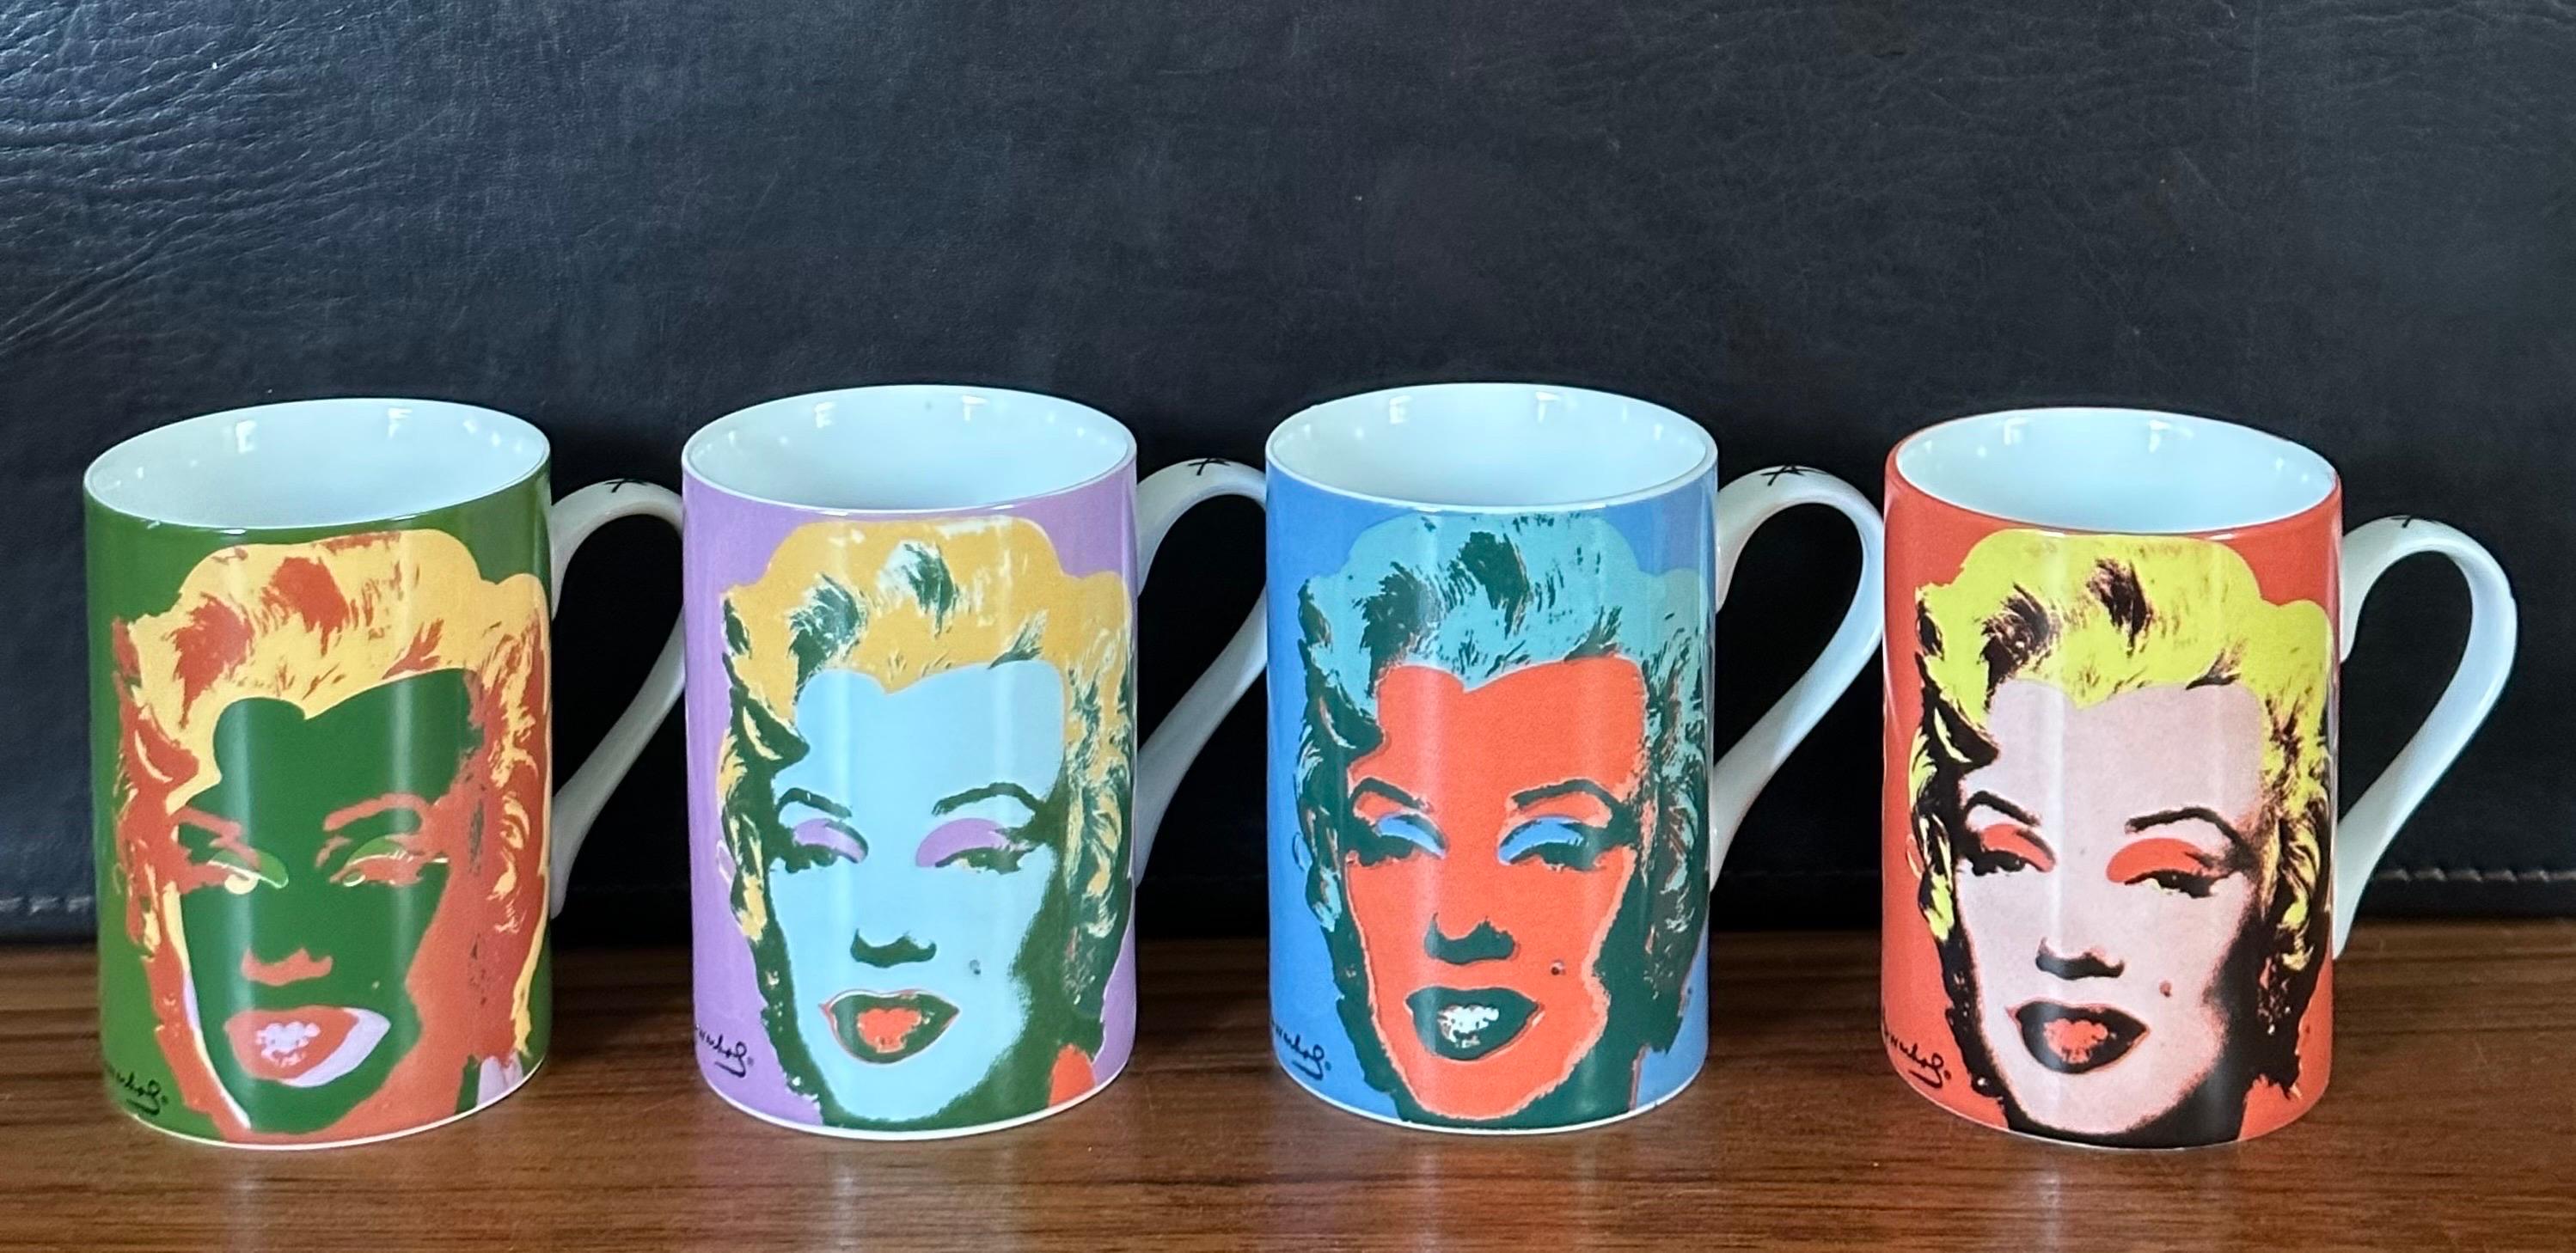 Set of Four Marilyn Monroe Ceramic Coffee Mugs in Box by Andy Warhol for Block  For Sale 3